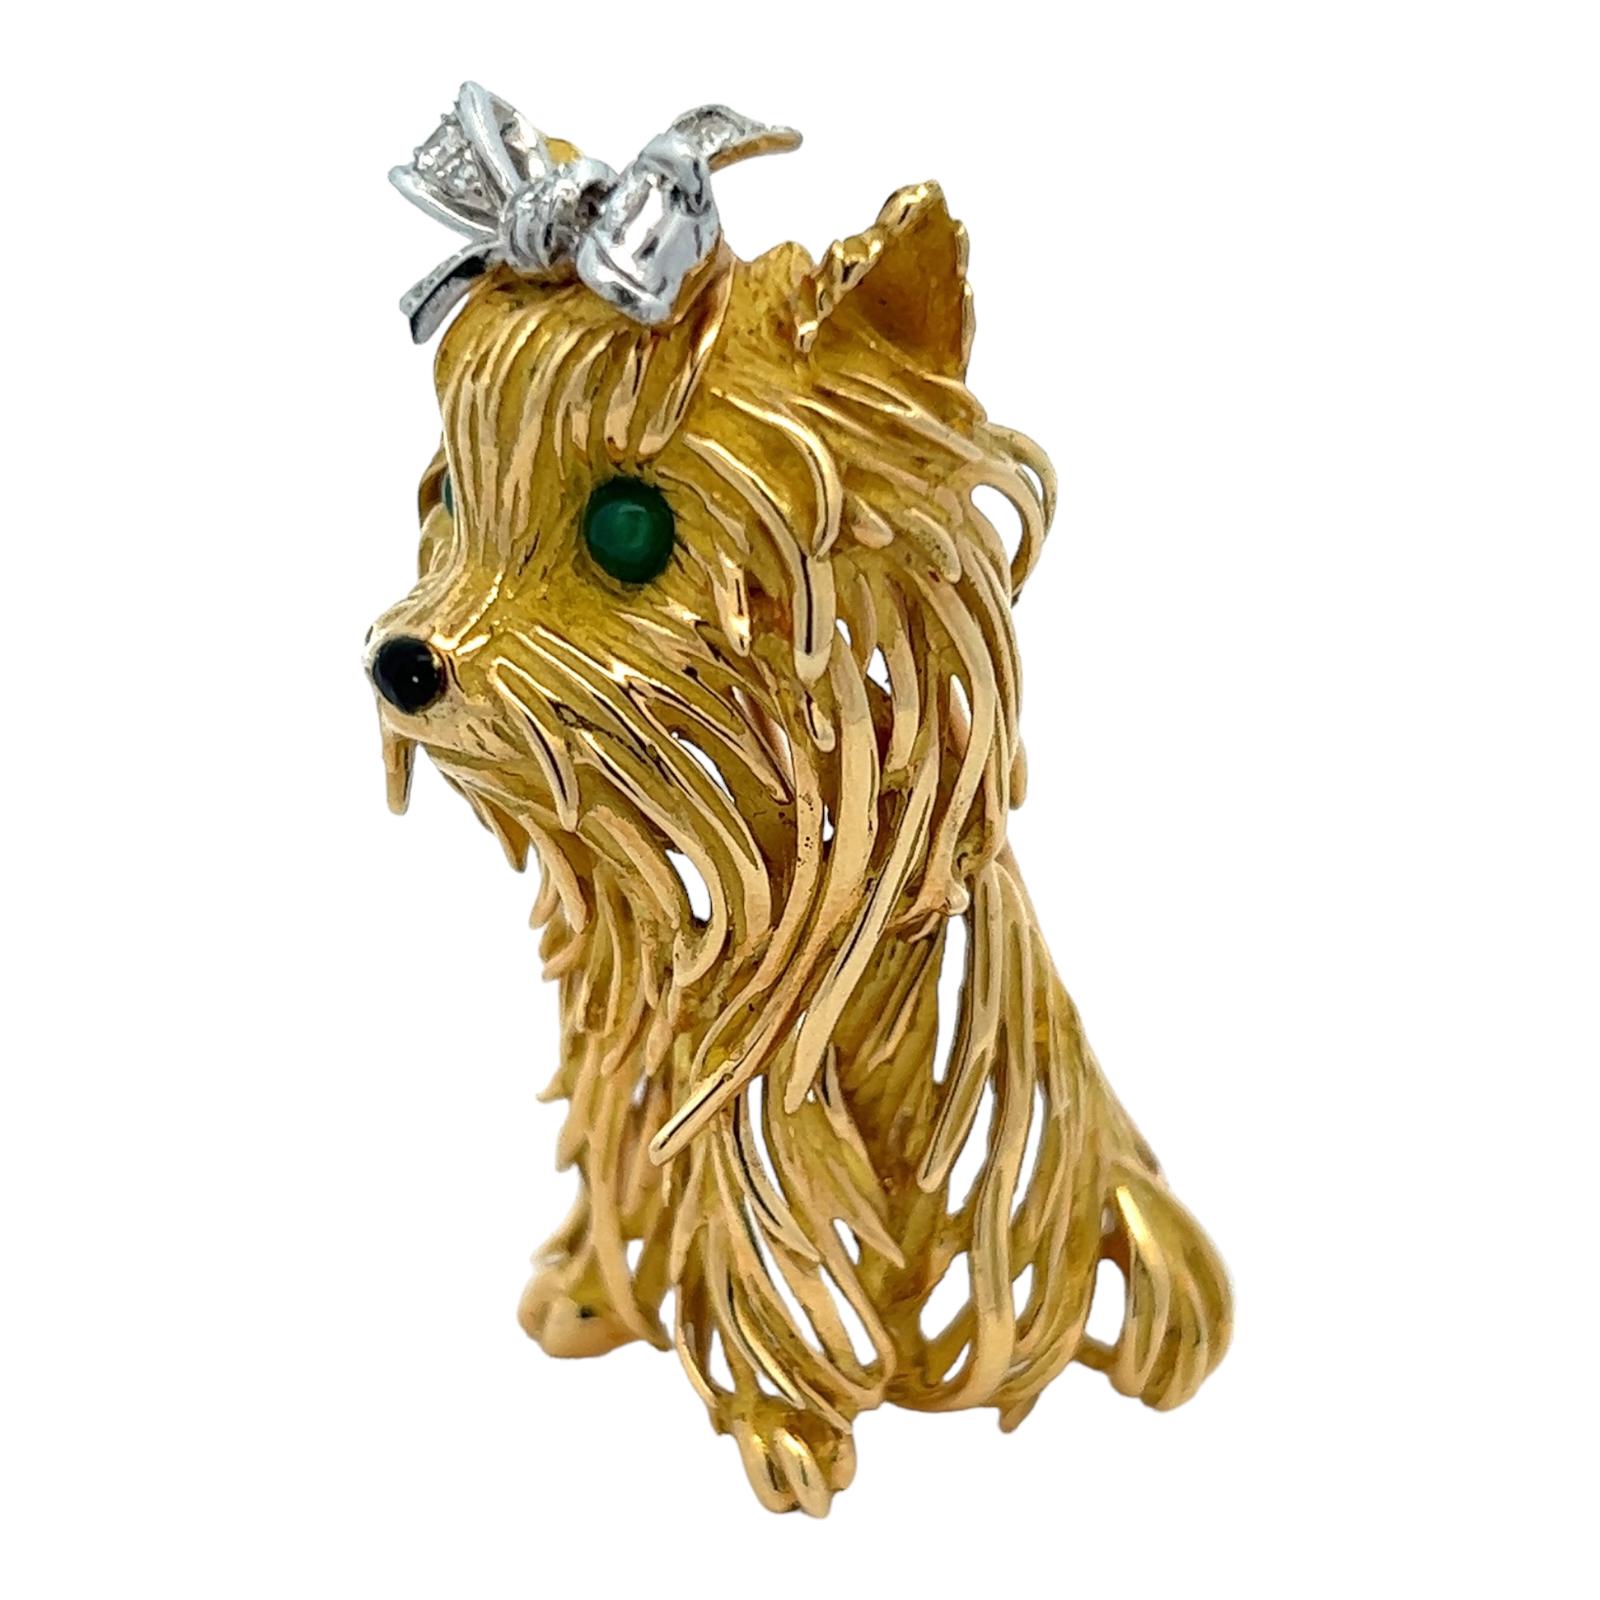 Adorable handcrafted dog pin fashioned in 18 karat yellow gold. The dog brooch features a diamond bow with 16 diamonds weighing approximately .17 CTW, and emerald eyes. The dog measures 1.75 inches in length and 20mm in width. Great gift idea for